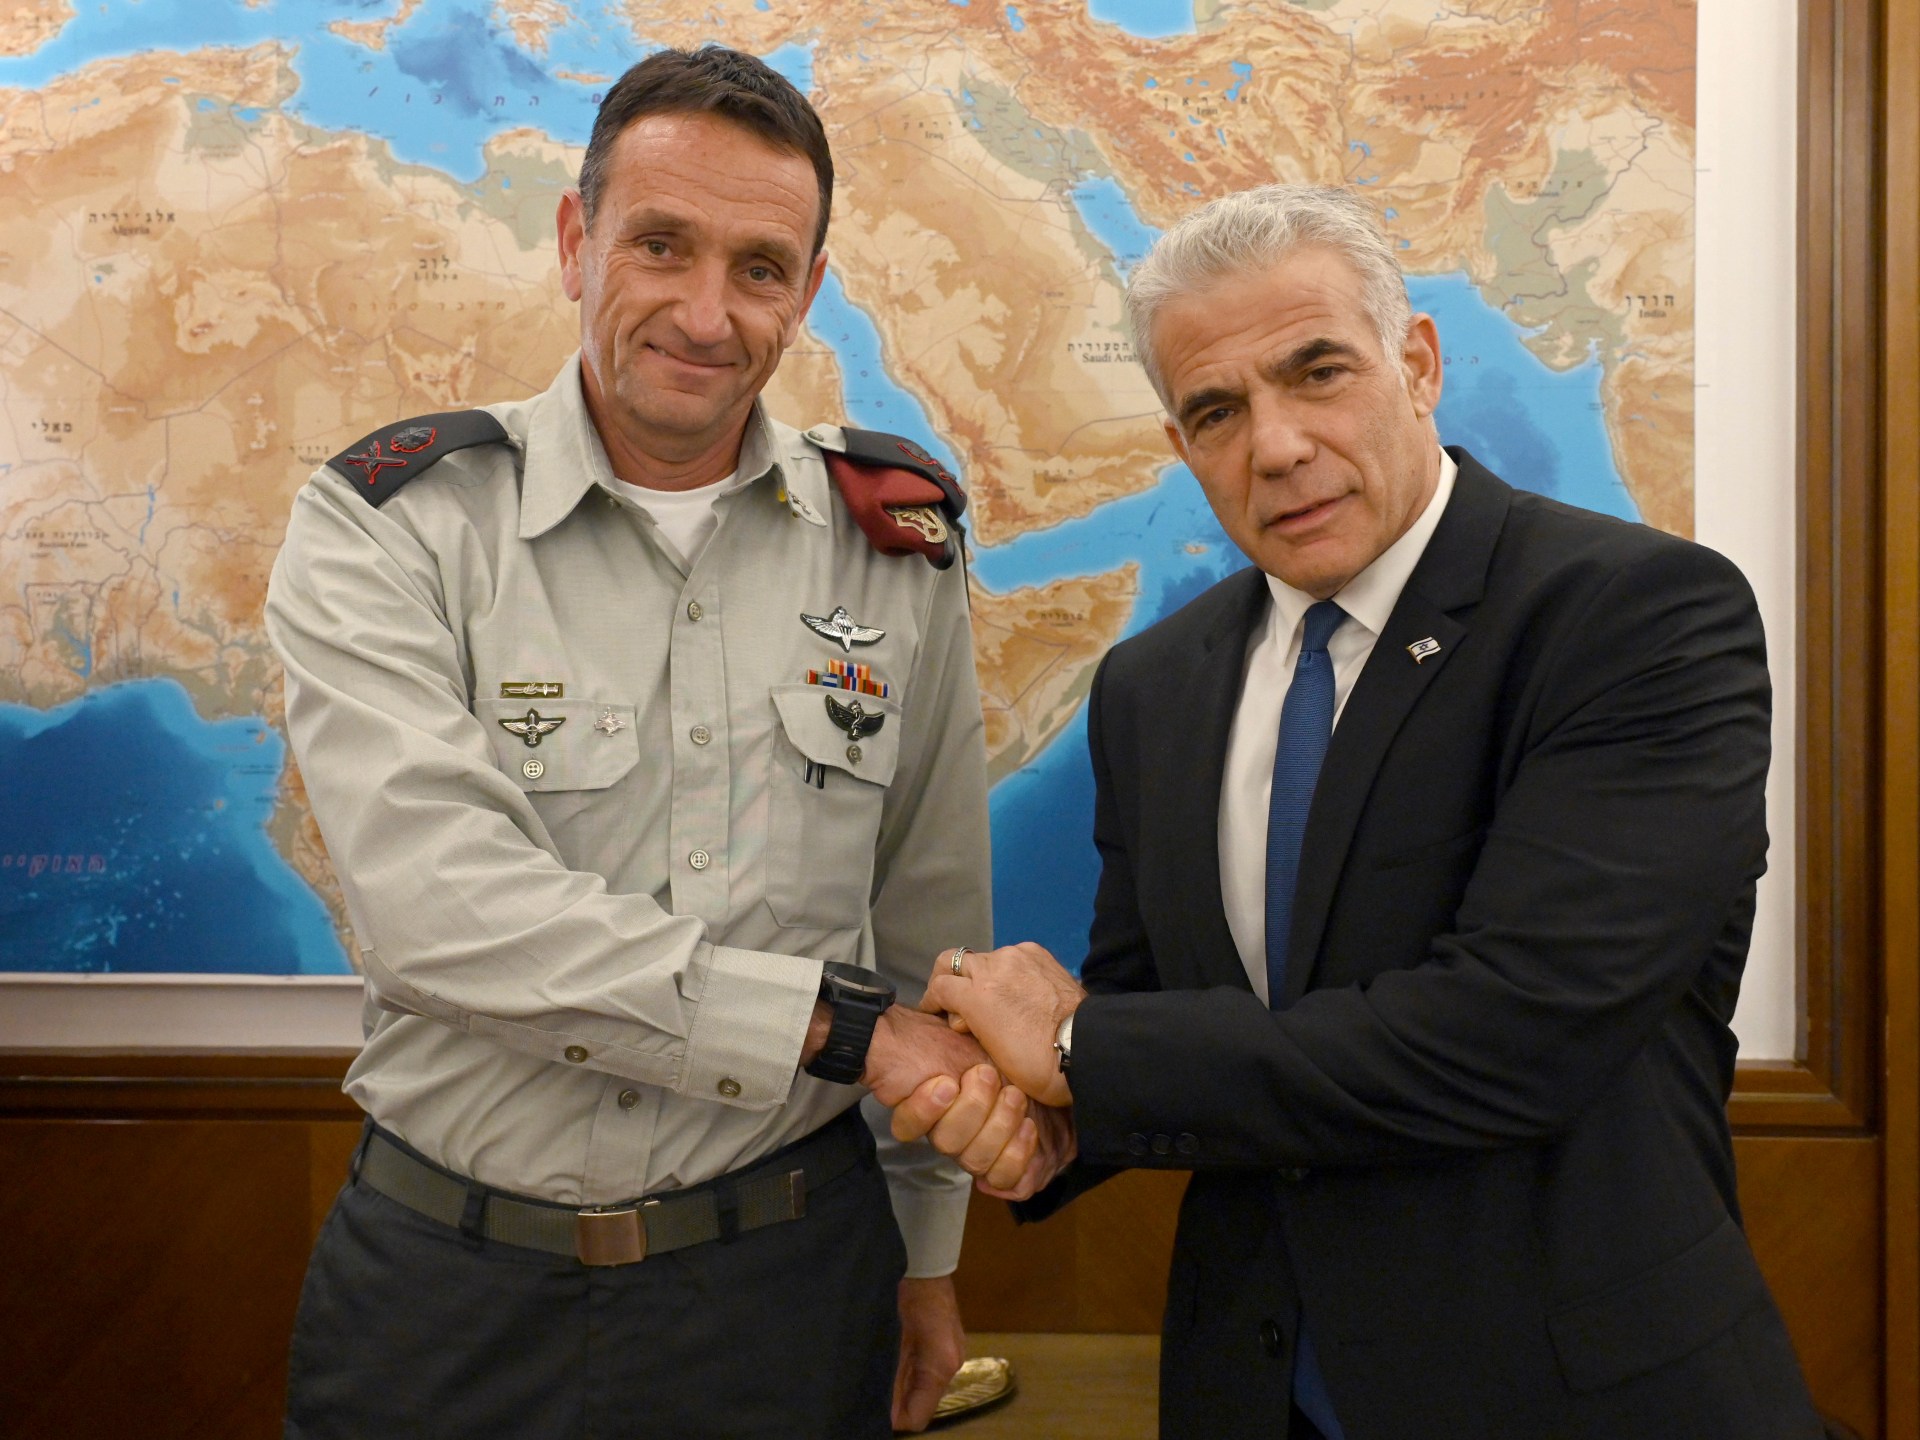 israel-appoints-settler-as-army-chief-in-occupied-west-bank